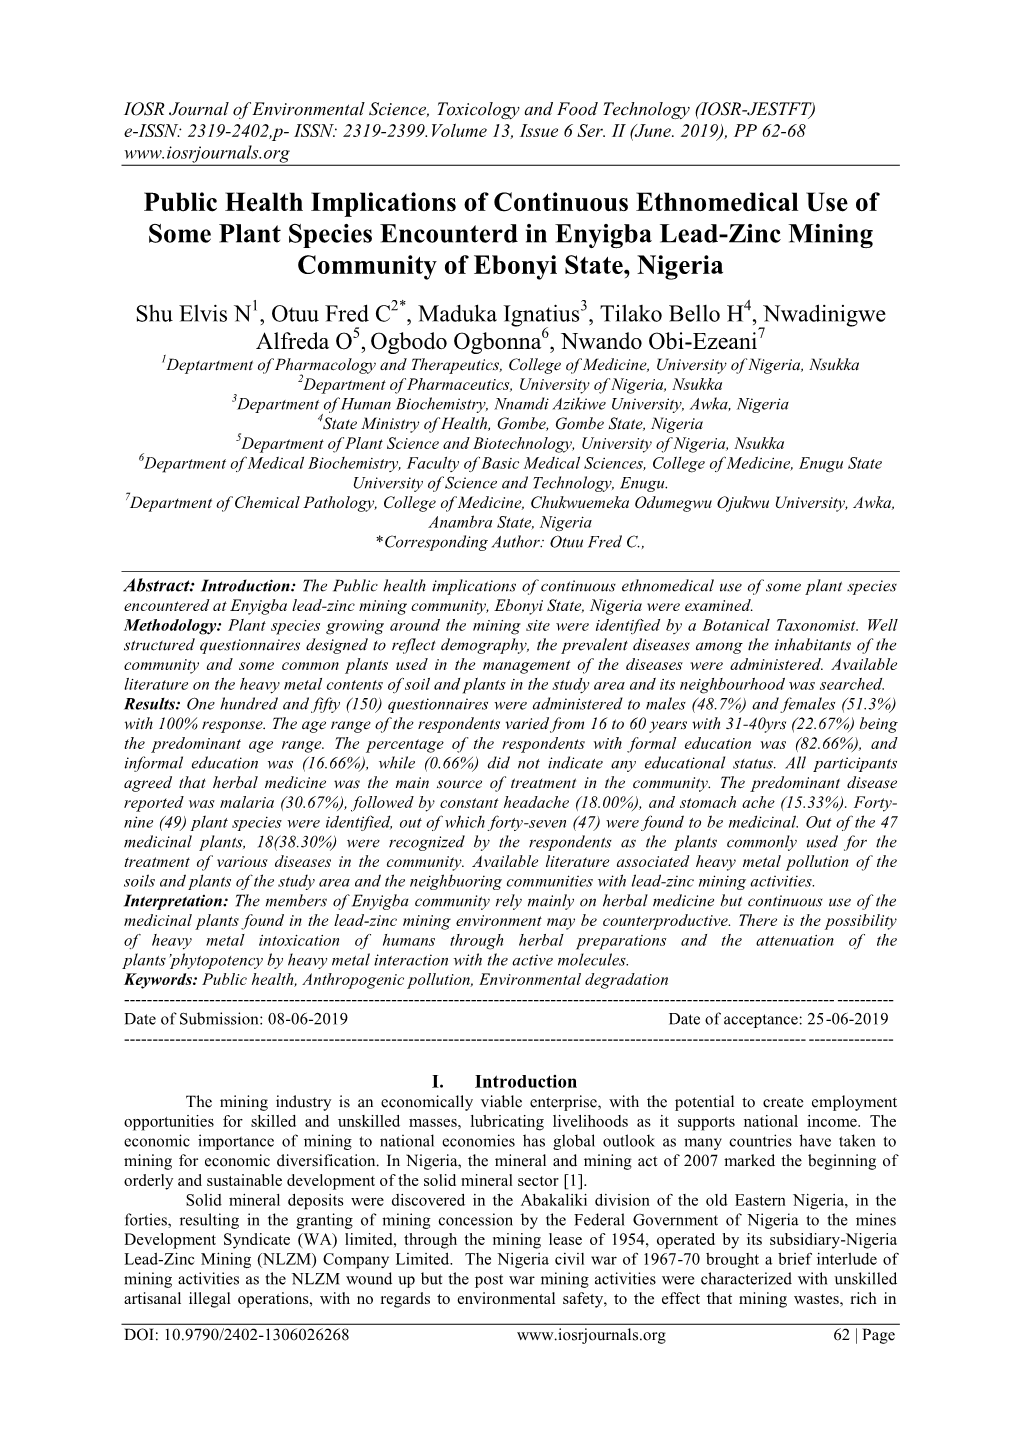 Public Health Implications of Continuous Ethnomedical Use of Some Plant Species Encounterd in Enyigba Lead-Zinc Mining Community of Ebonyi State, Nigeria